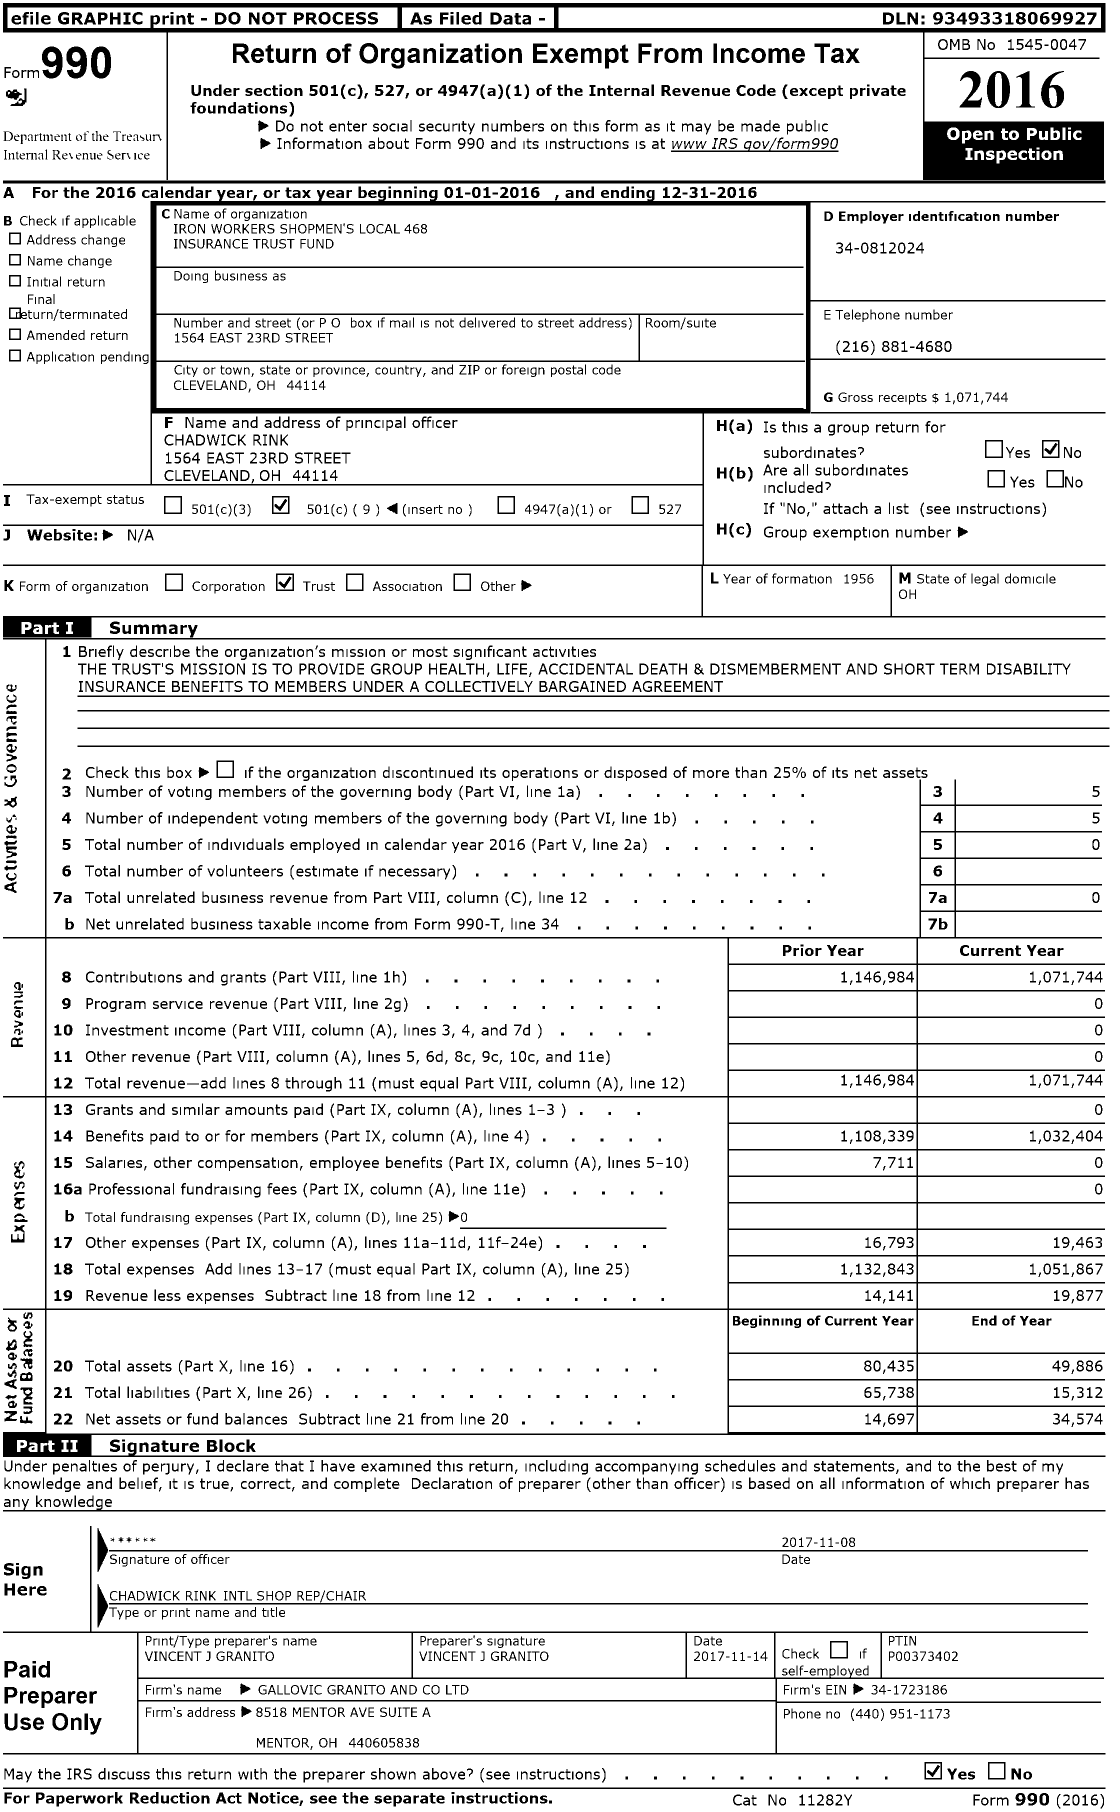 Image of first page of 2016 Form 990O for Iron Workers Shopmen's Local 468 Insurance Trust Fund